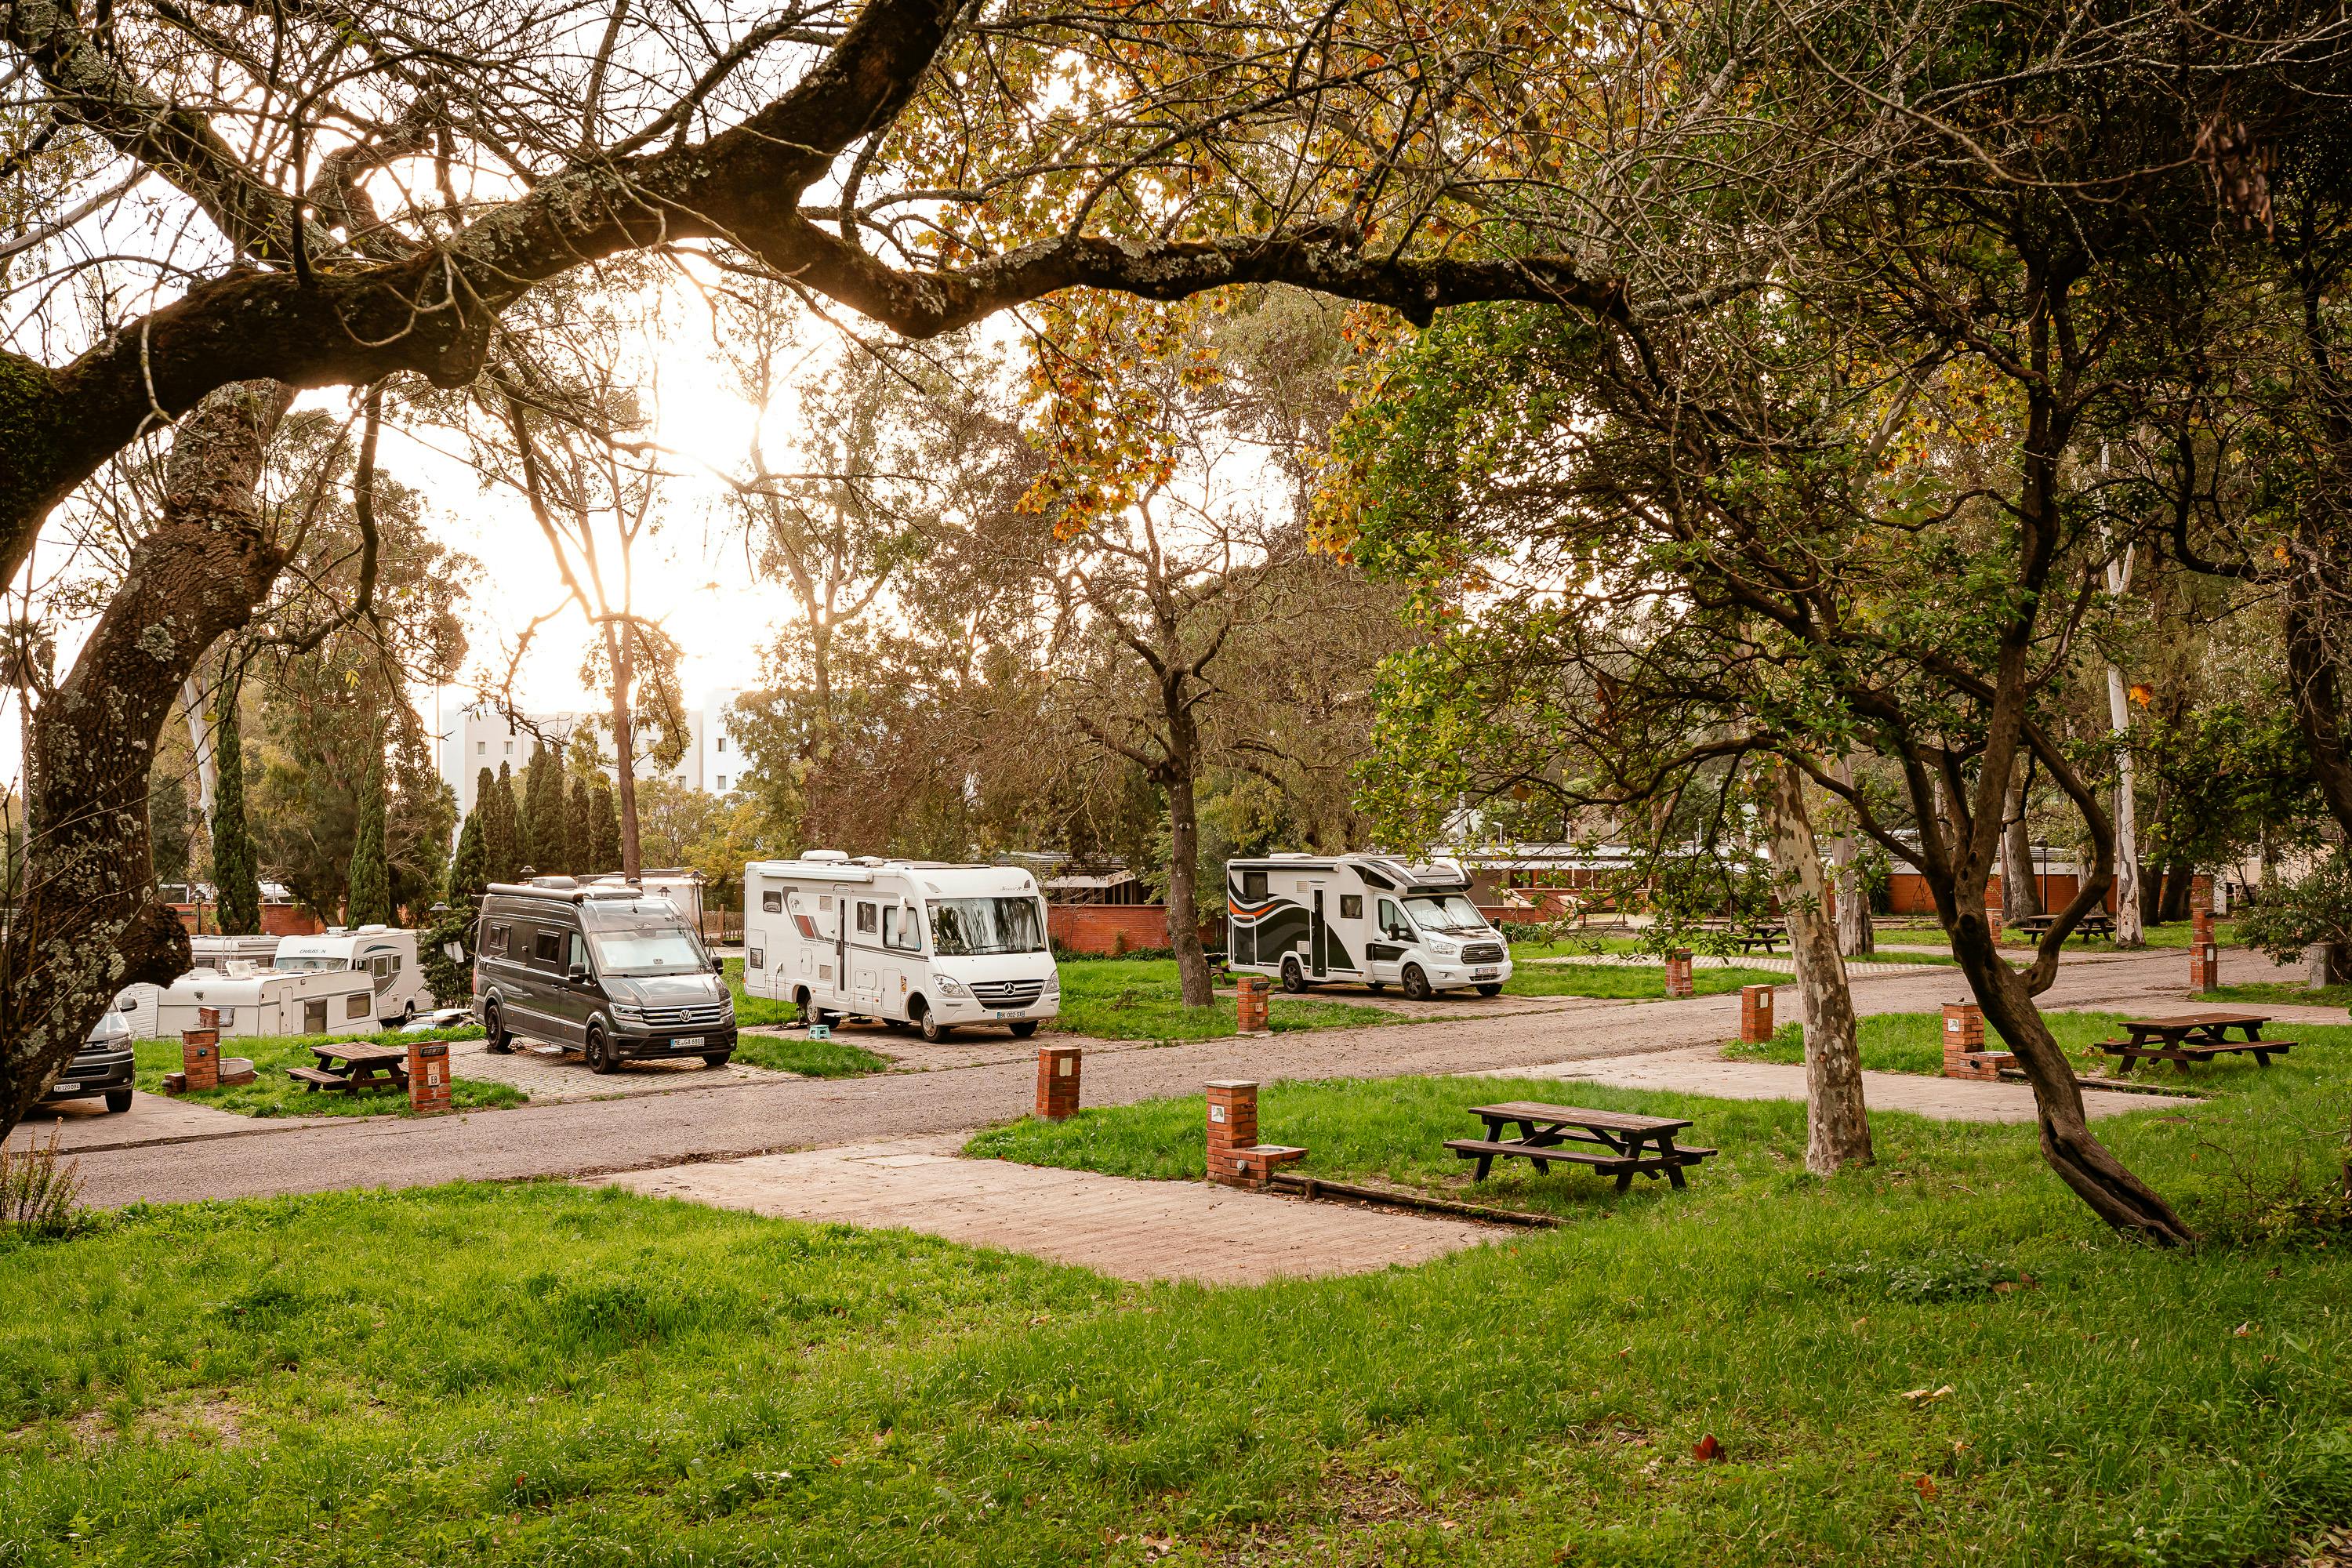 Lisboa Camping offers fully equipped campervan-ready campsites near Lisbon